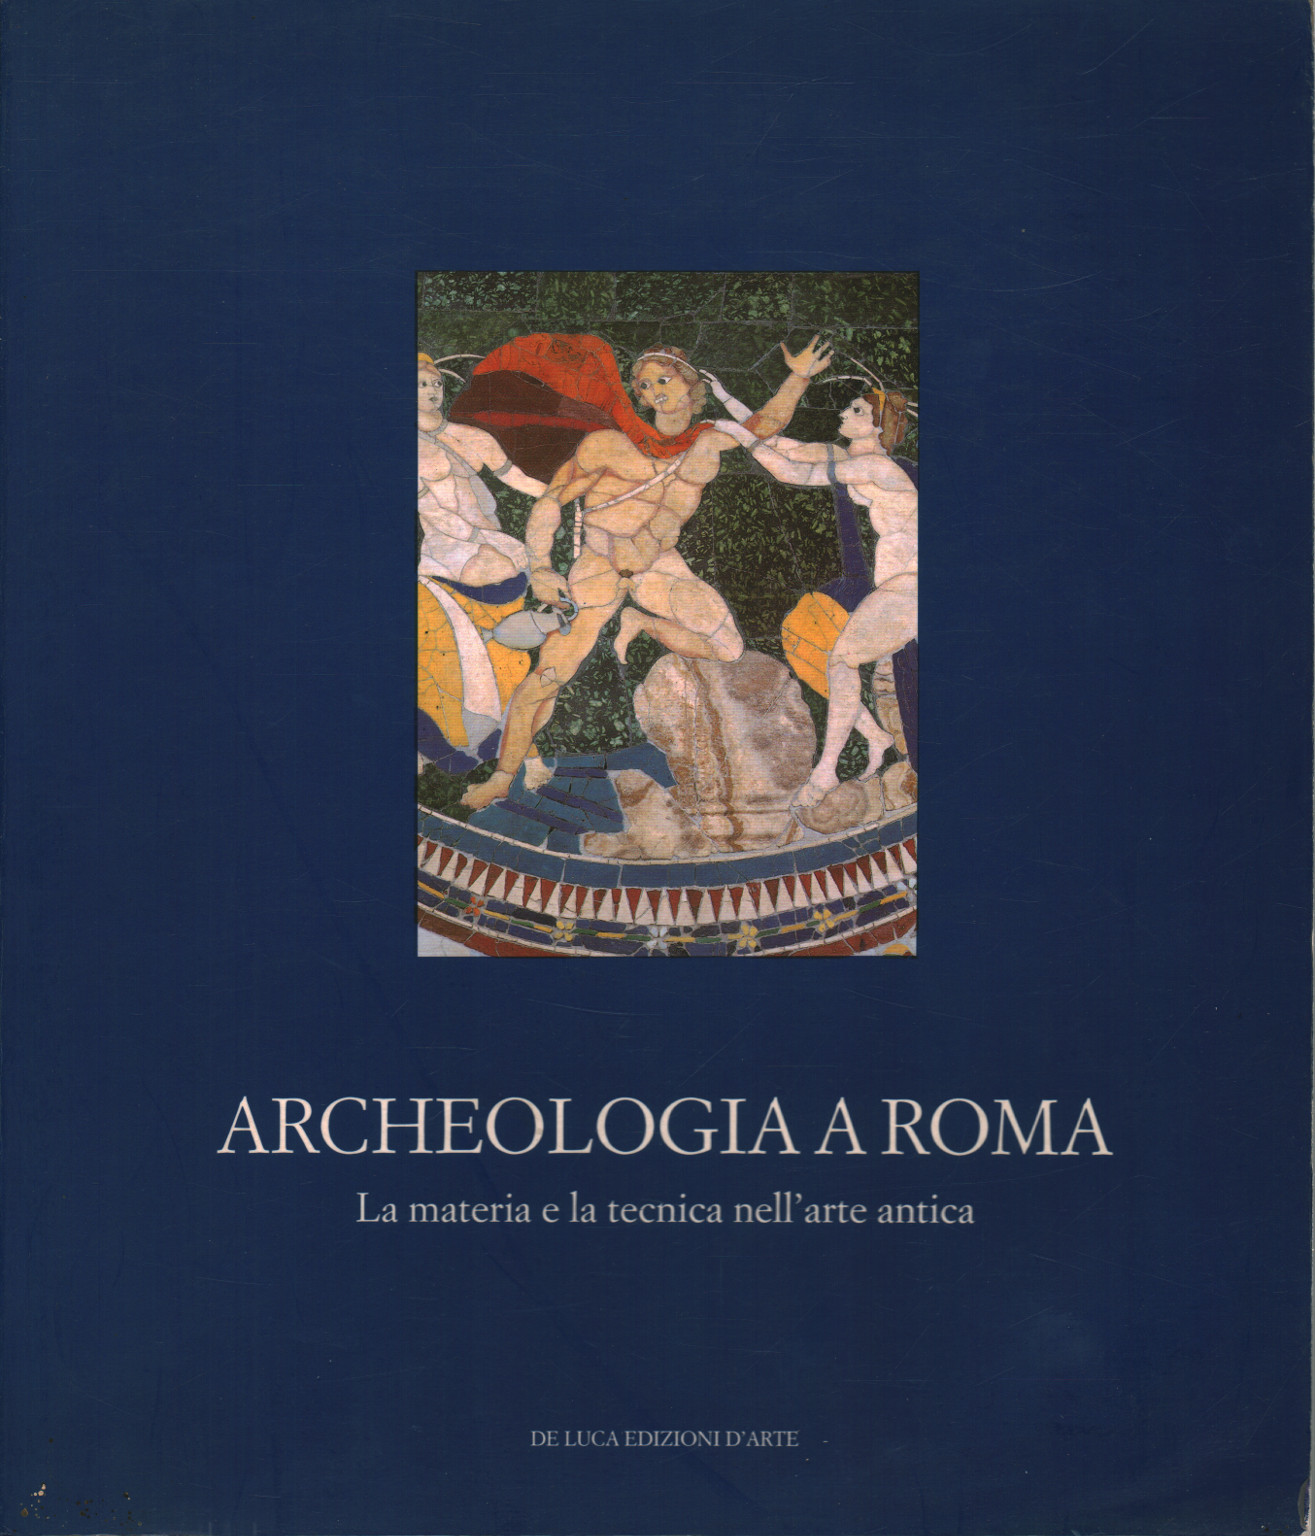 Archaeology of Rome, s.a.